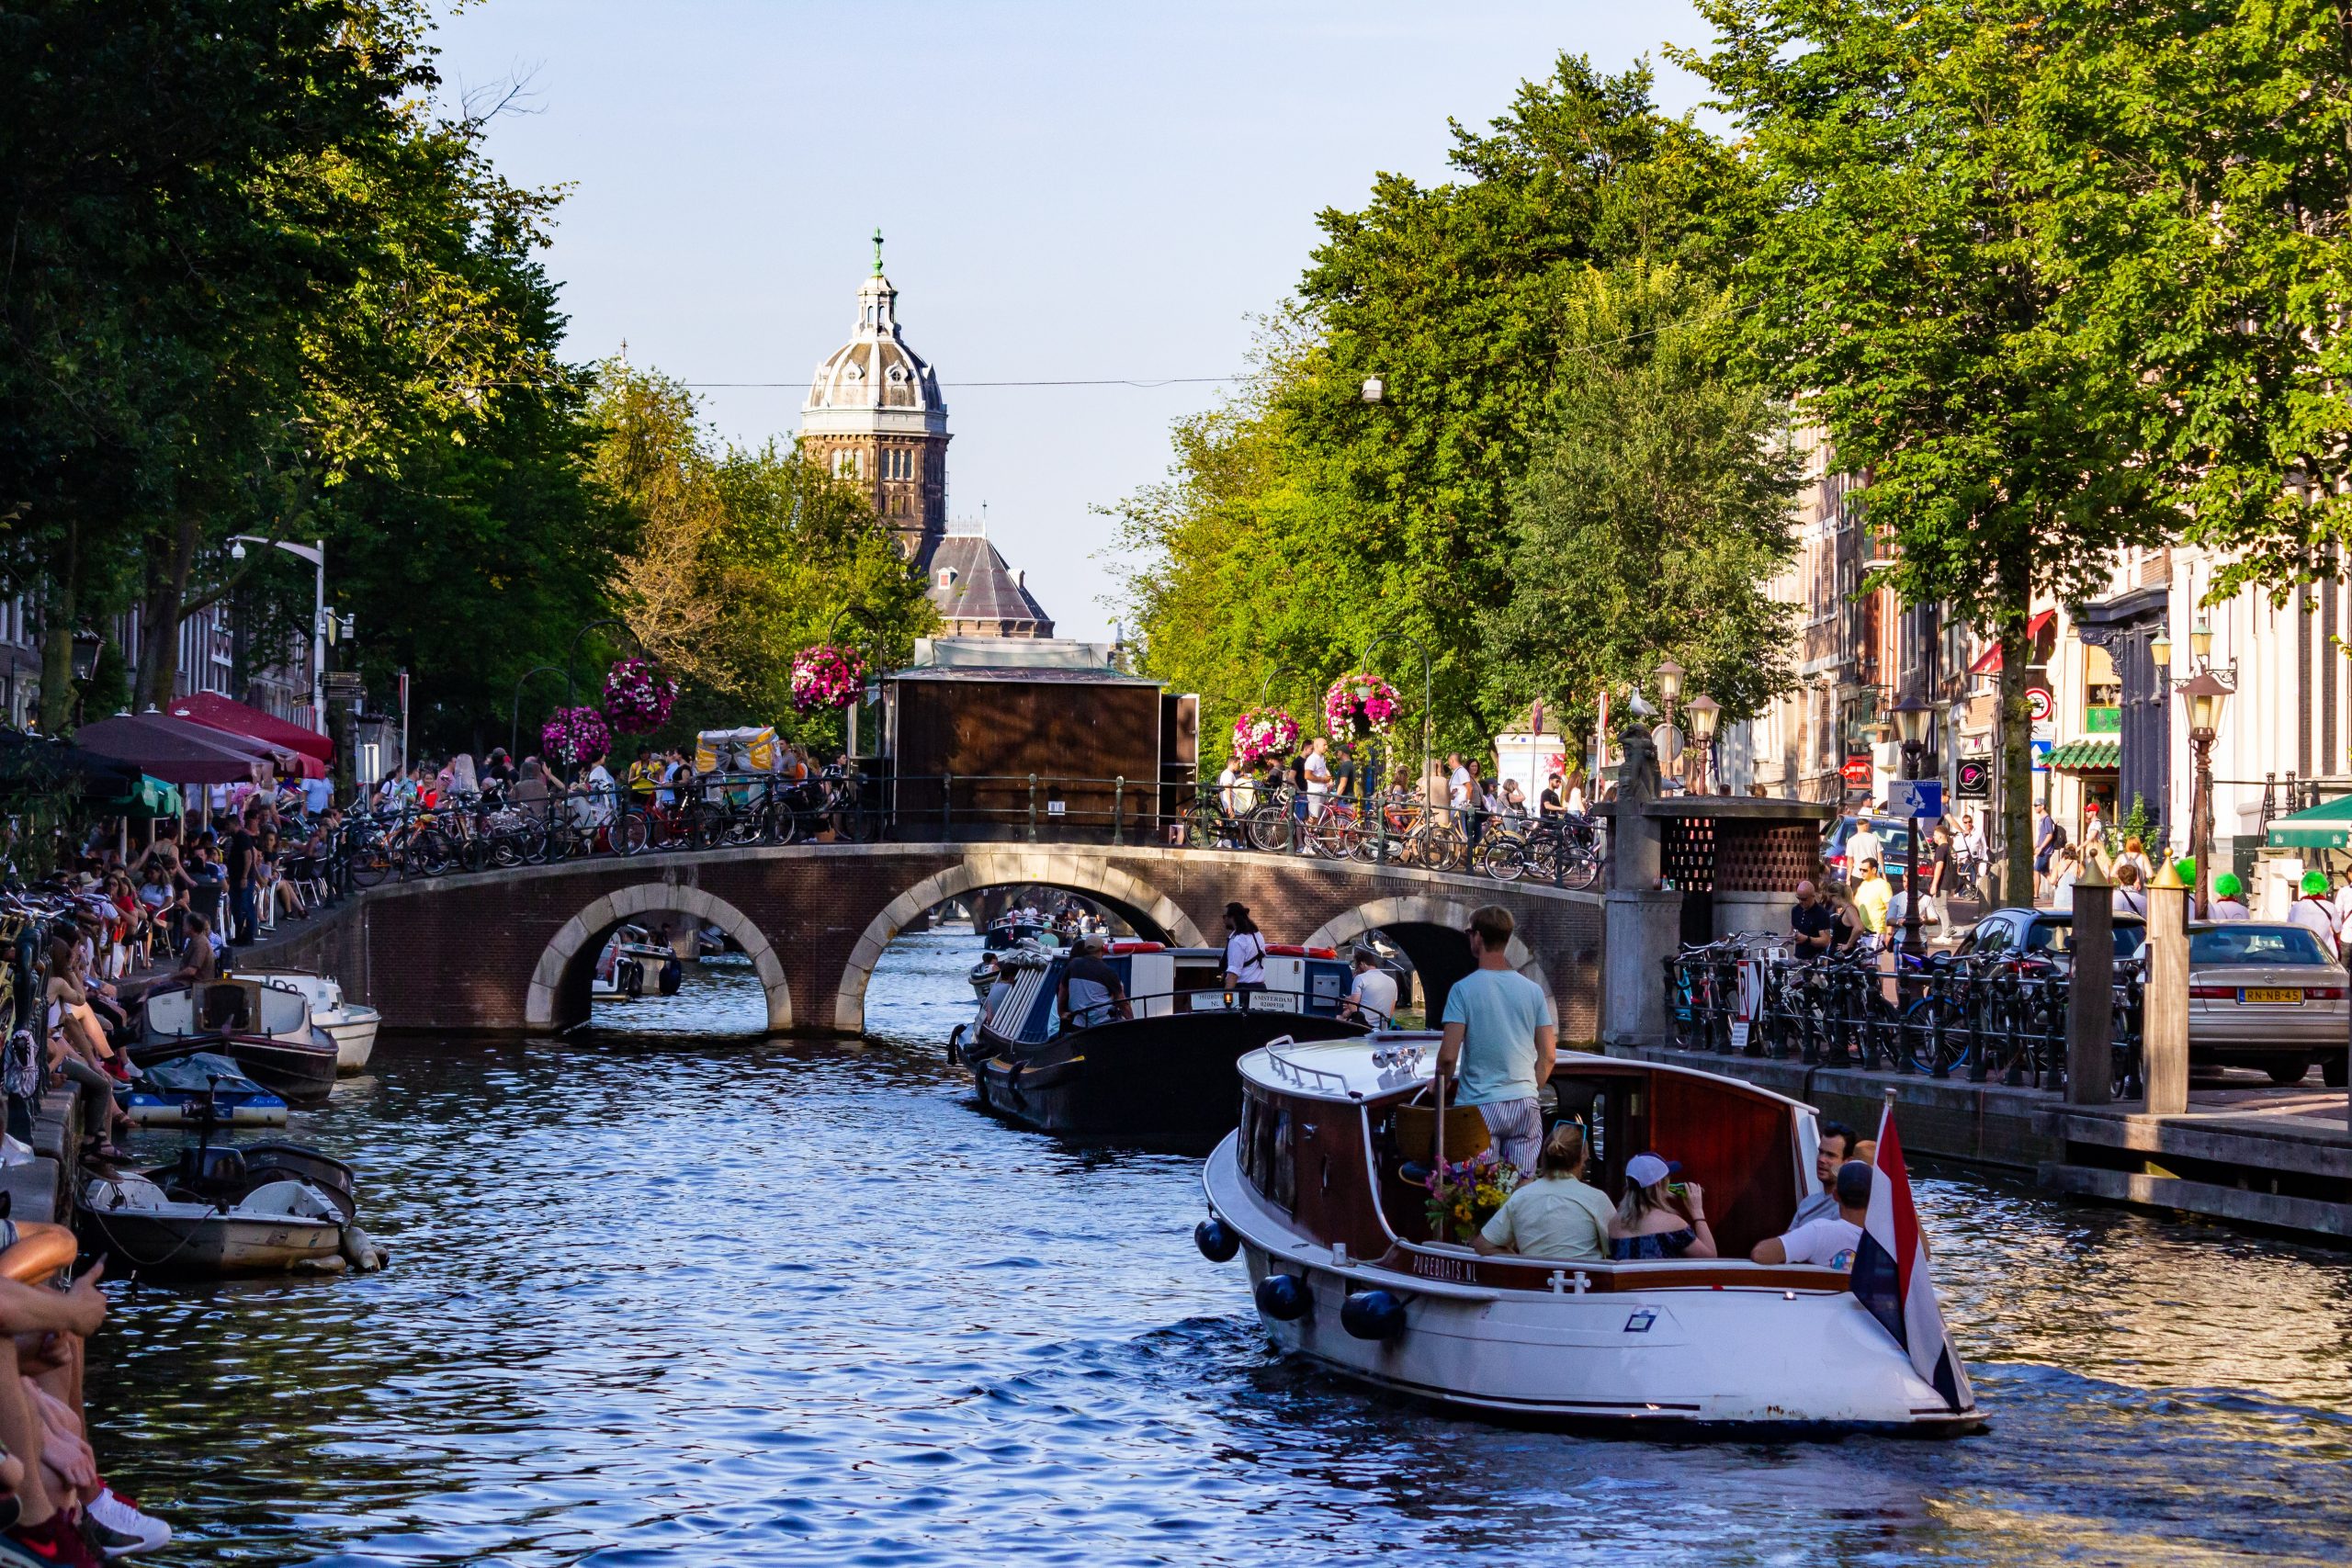 Amsterdam, one of the safest cities in the world